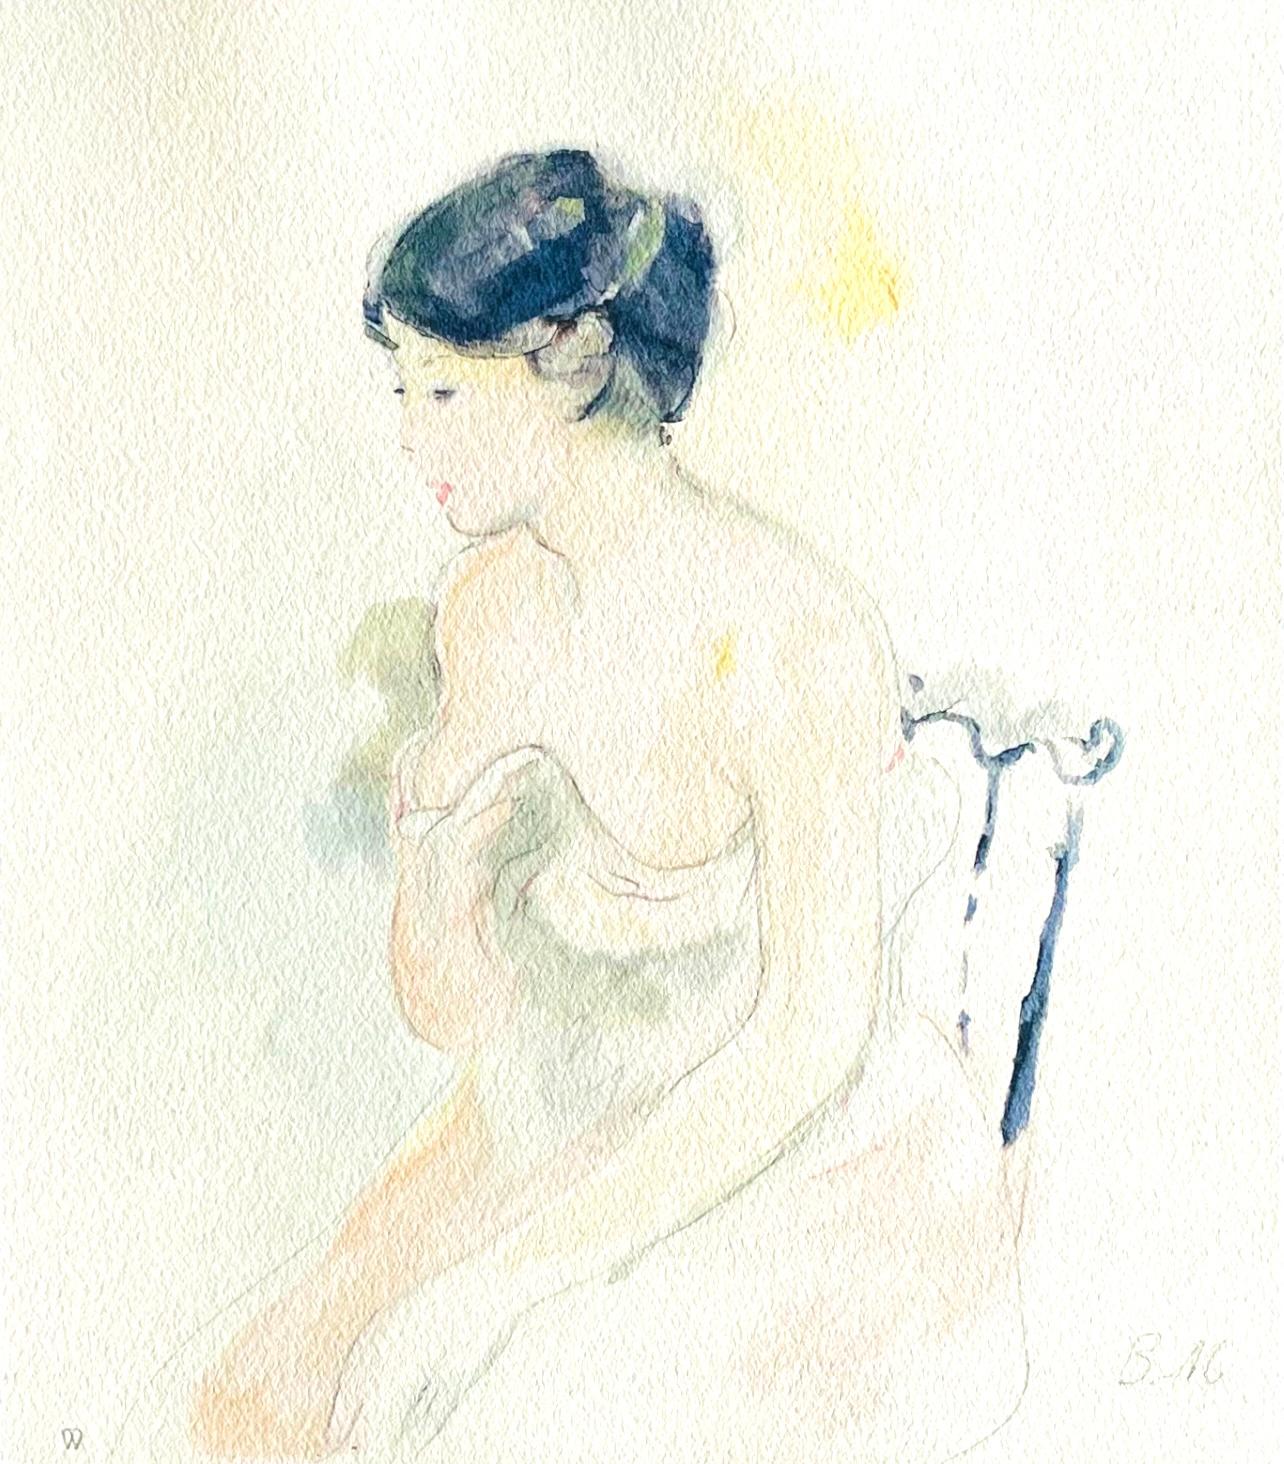 Lithograph and Stencil on vélin du Marais paper. Inscription: unsigned and unnumbered, as issued. Good condition with centerfold, as issued. Notes: From the folio, Berthe Morisot Seize Aquarelles, 1946. Published by Éditions des Quatre Chemins,